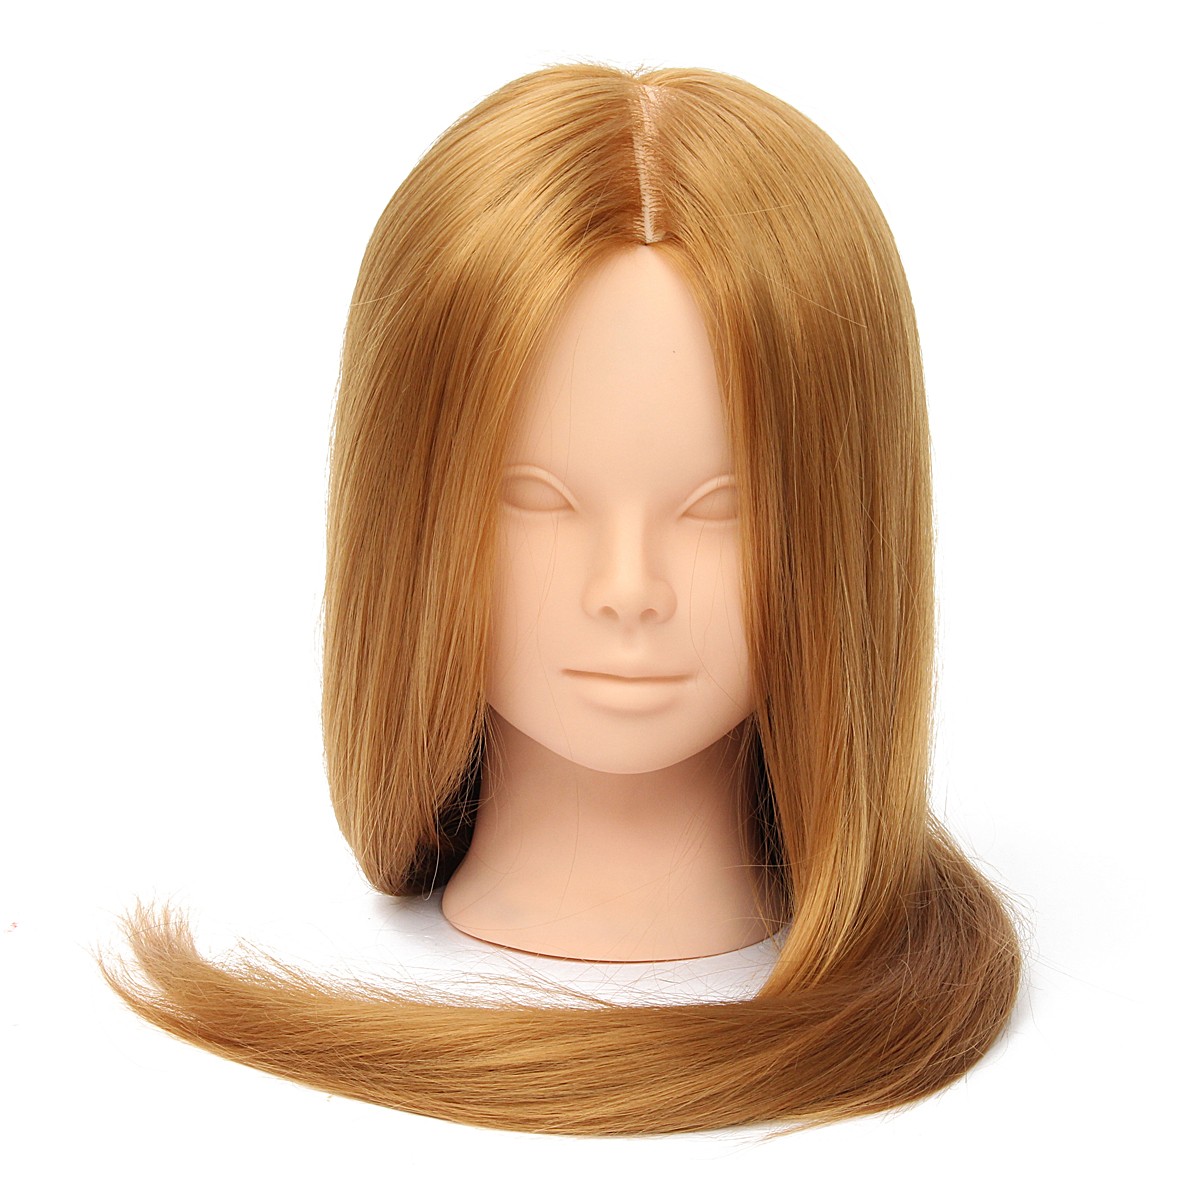 26quot-Long-Hair-Training-Mannequin-Head-Model-Hairdressing-Makeup-Practice-with-Clamp-Holder-1076404